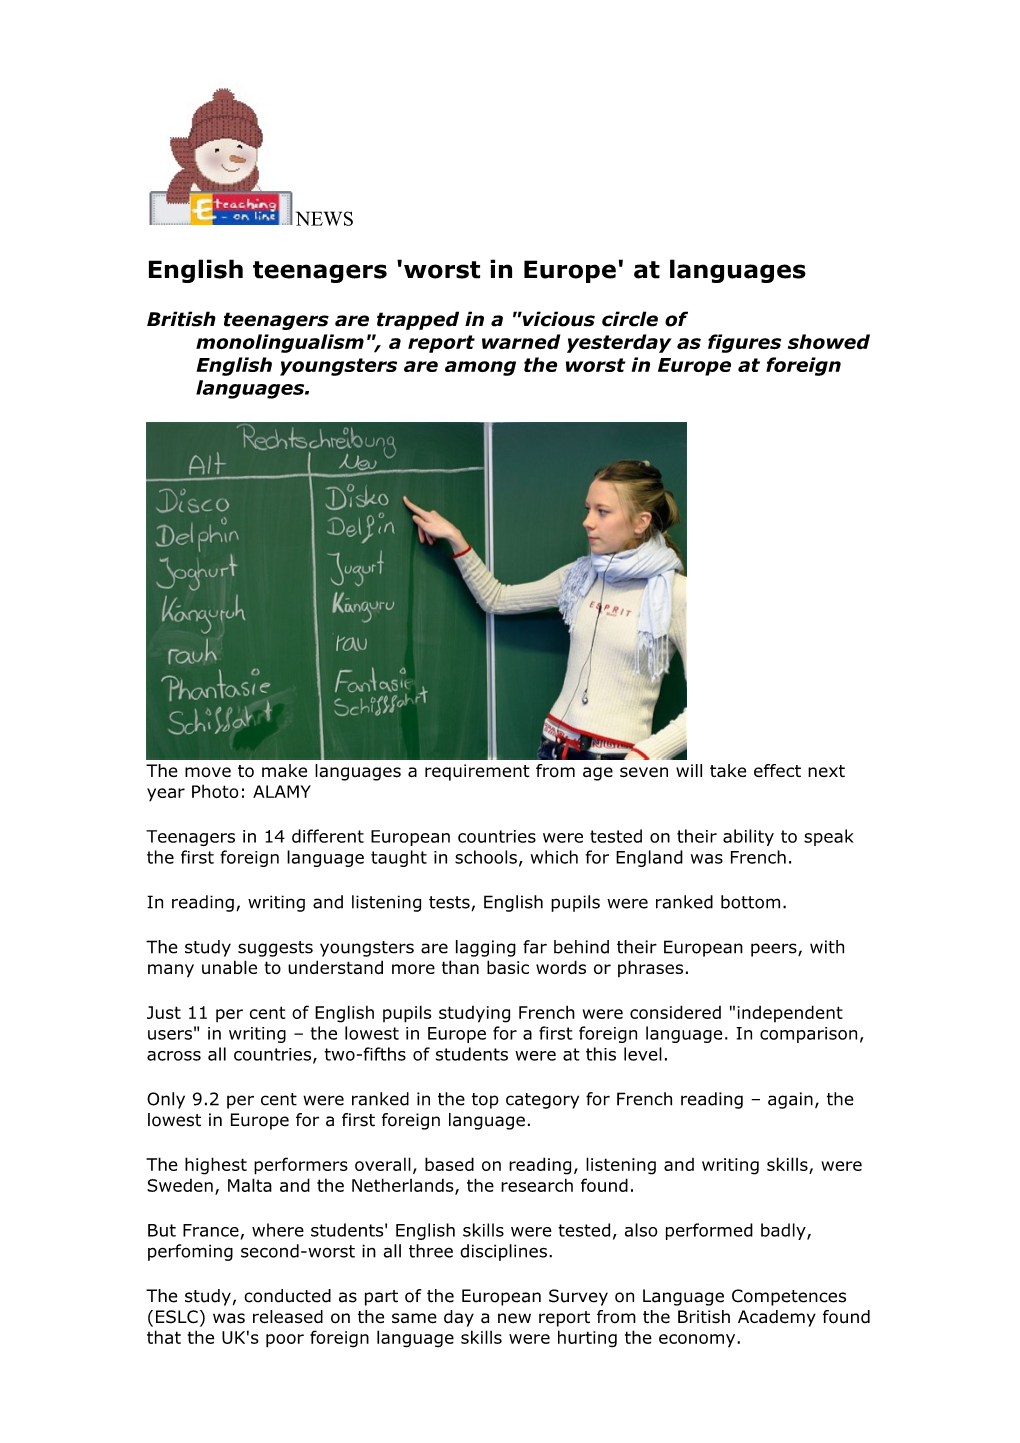 English Teenagers 'Worst in Europe' at Languages